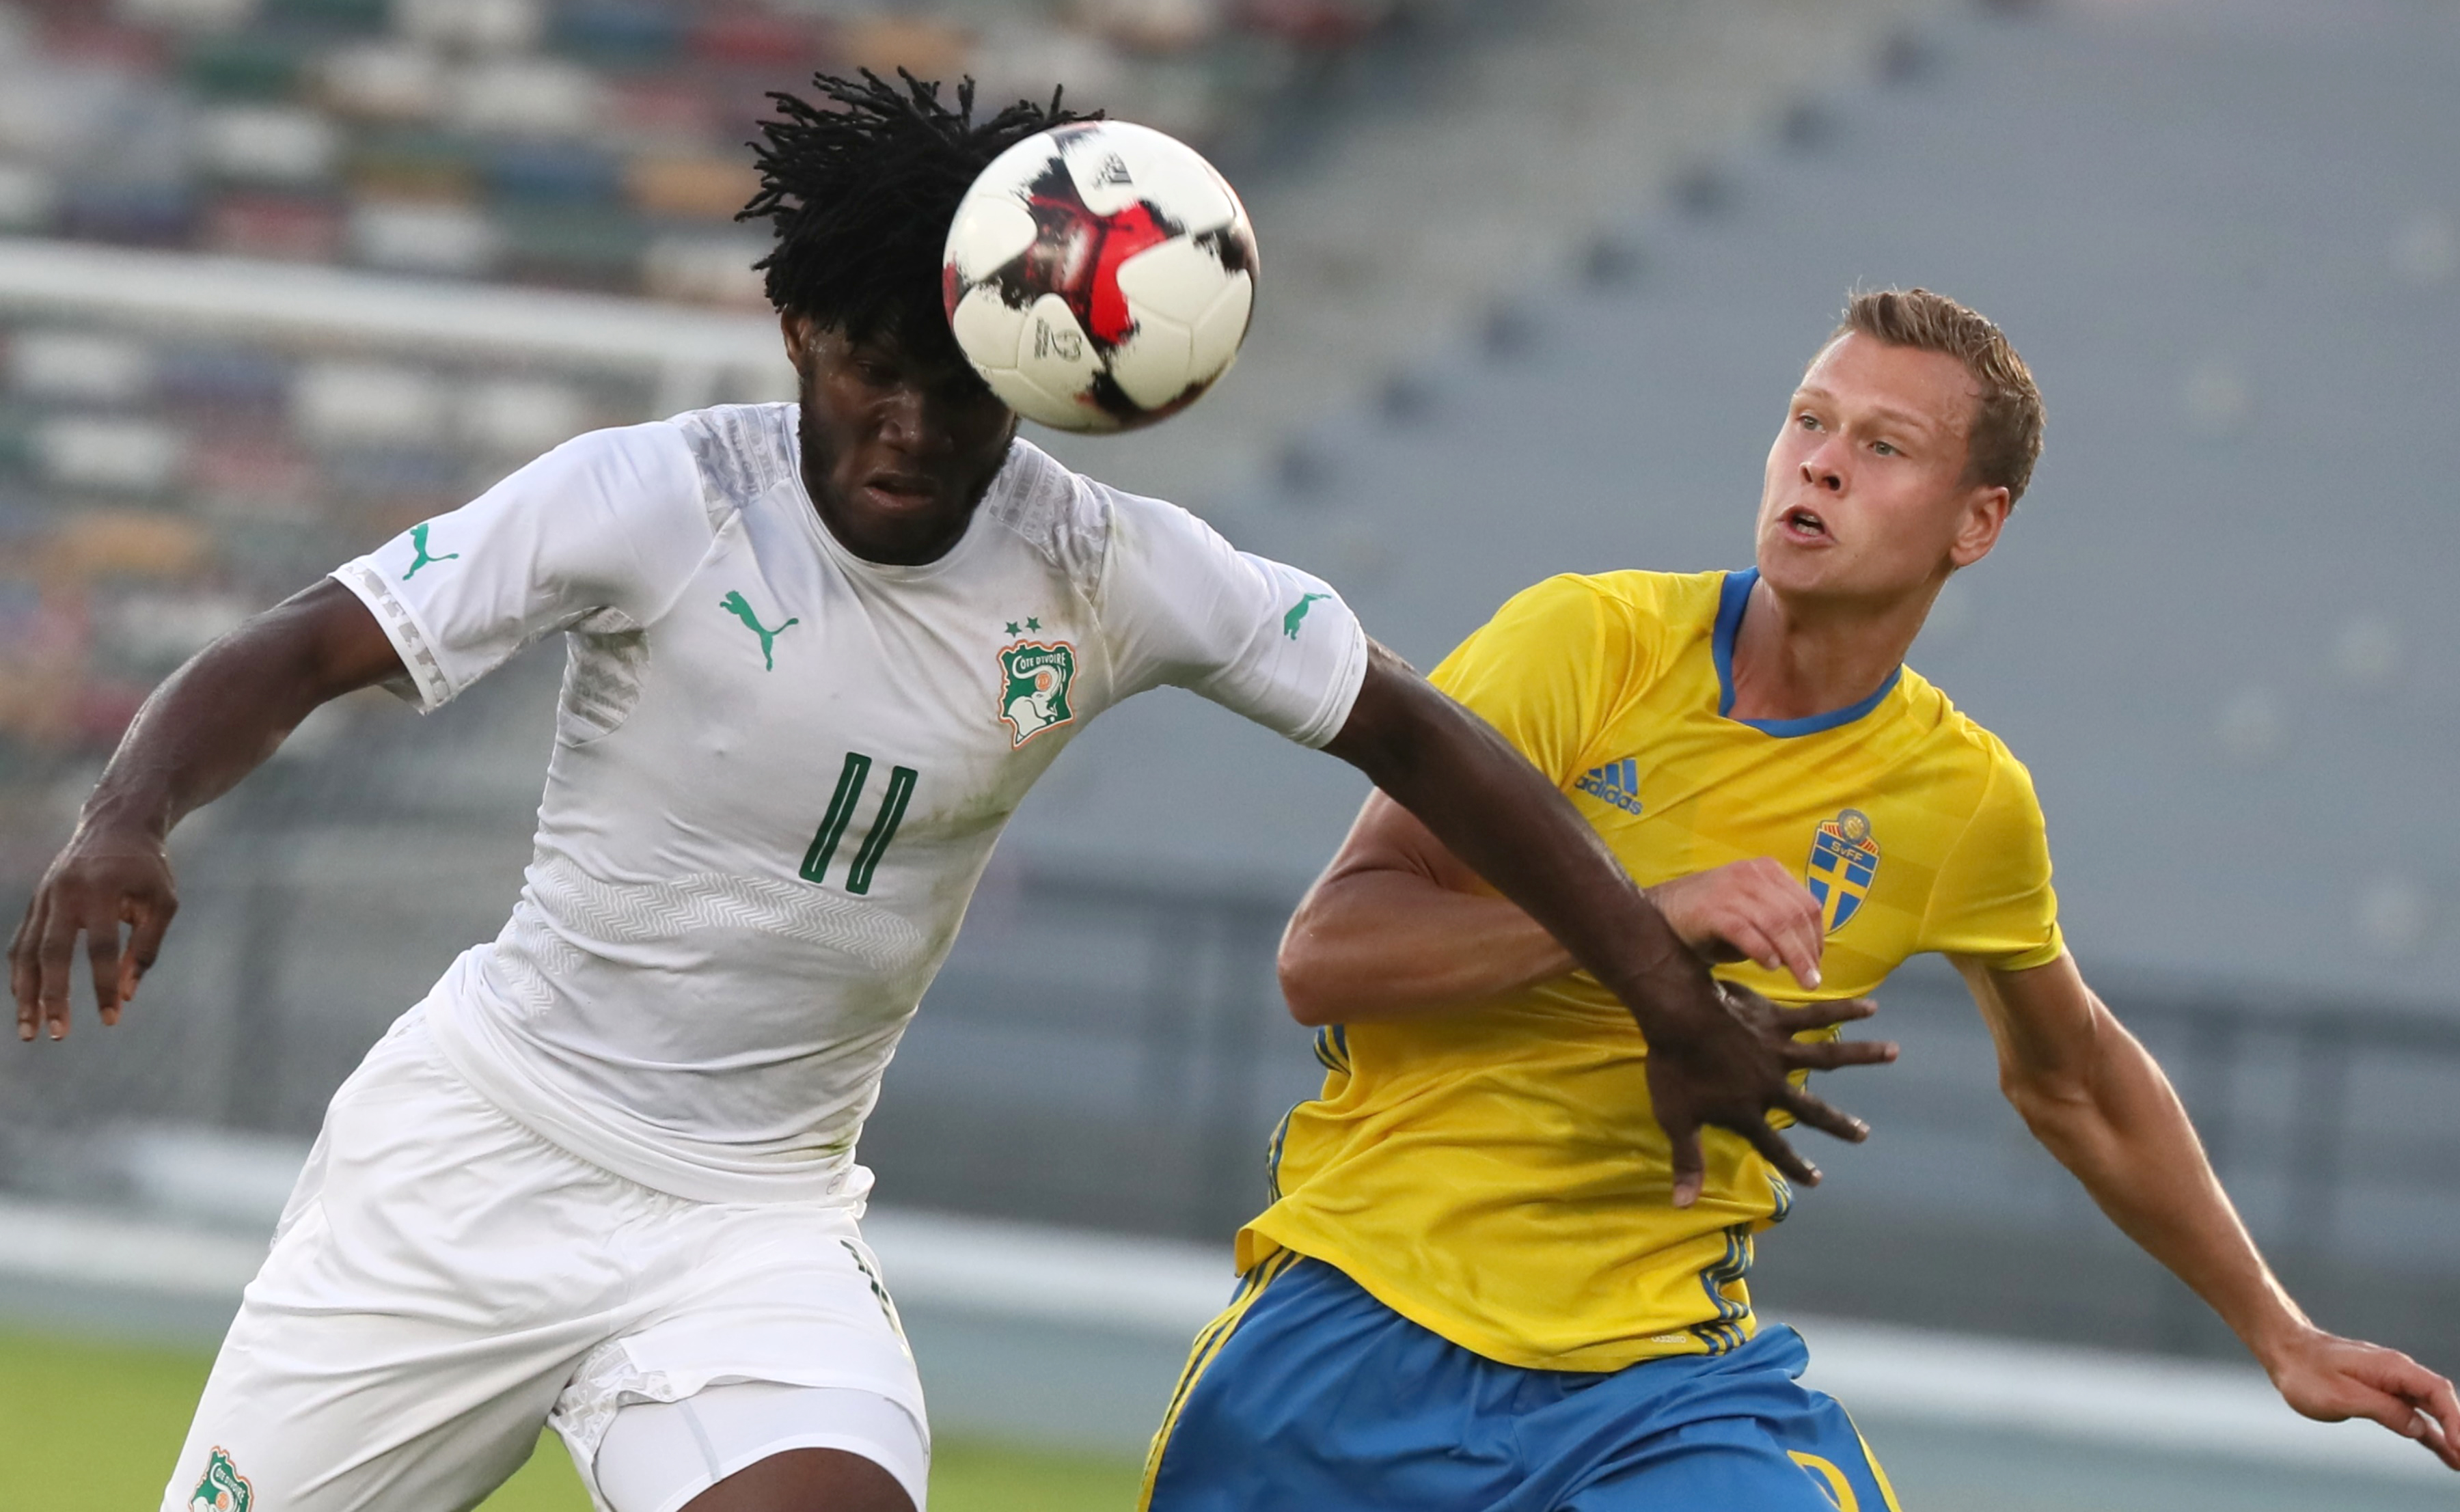 Ivory Coast's Franck Kessie (L) vies for the ball with Sweden's Viktor Claesson (R) during the International friendly football match between Sweden and Ivory Coast in Abu Dhabi on January 8, 2017. / AFP / KARIM SAHIB        (Photo credit should read KARIM SAHIB/AFP/Getty Images)